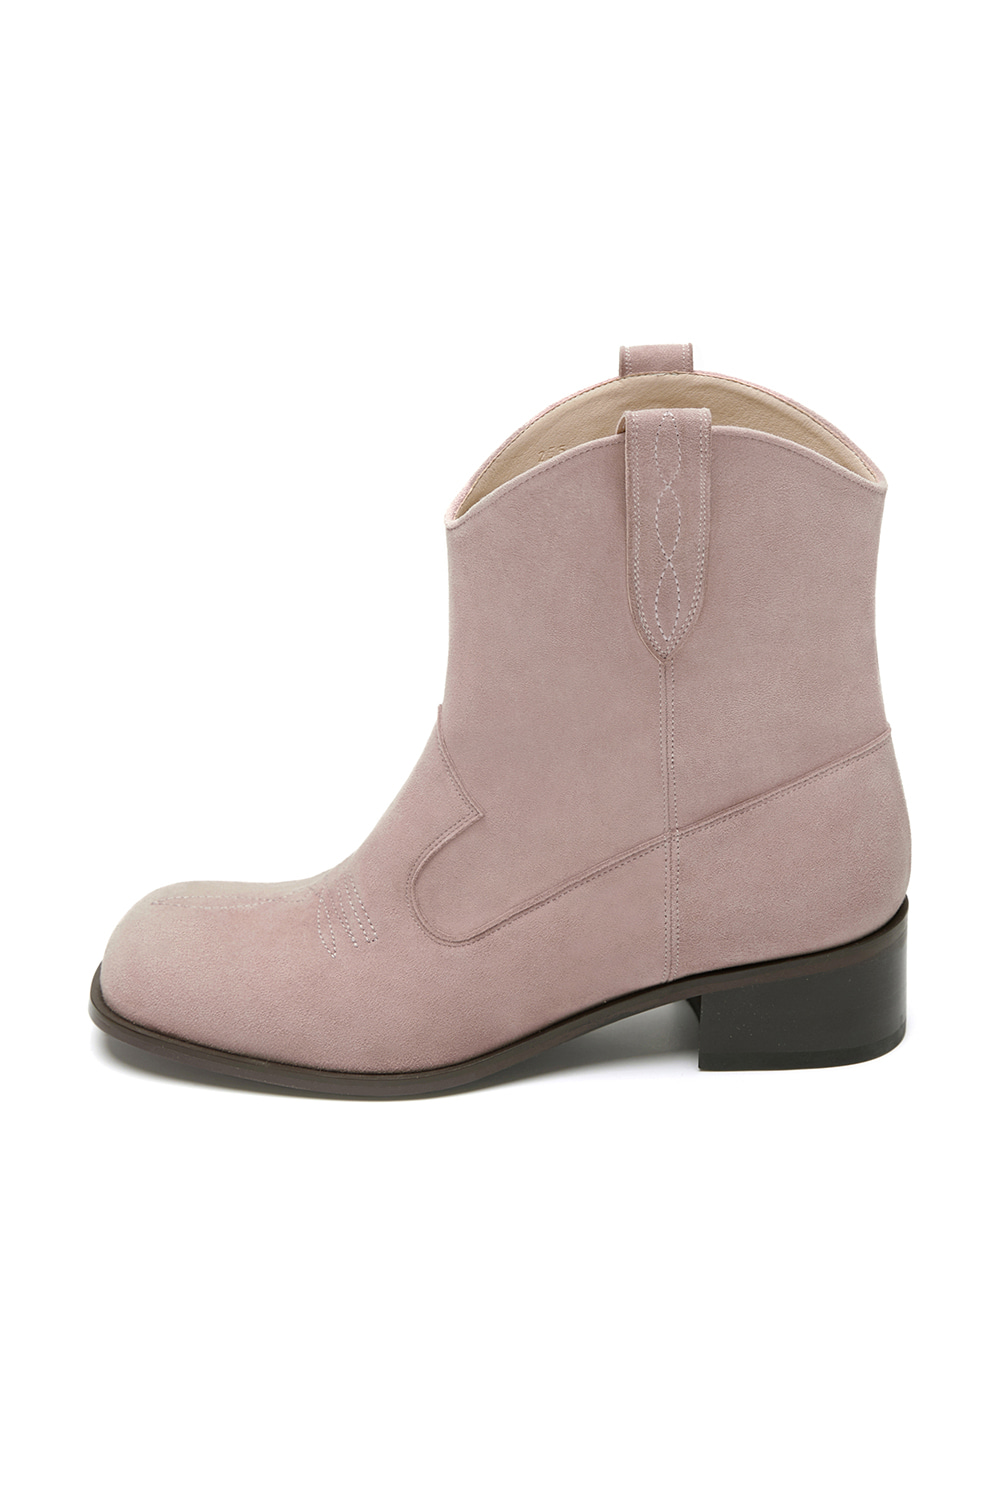 WESTERN ROUND SQUARE TOE MIDDLE BOOTS [PINK]		